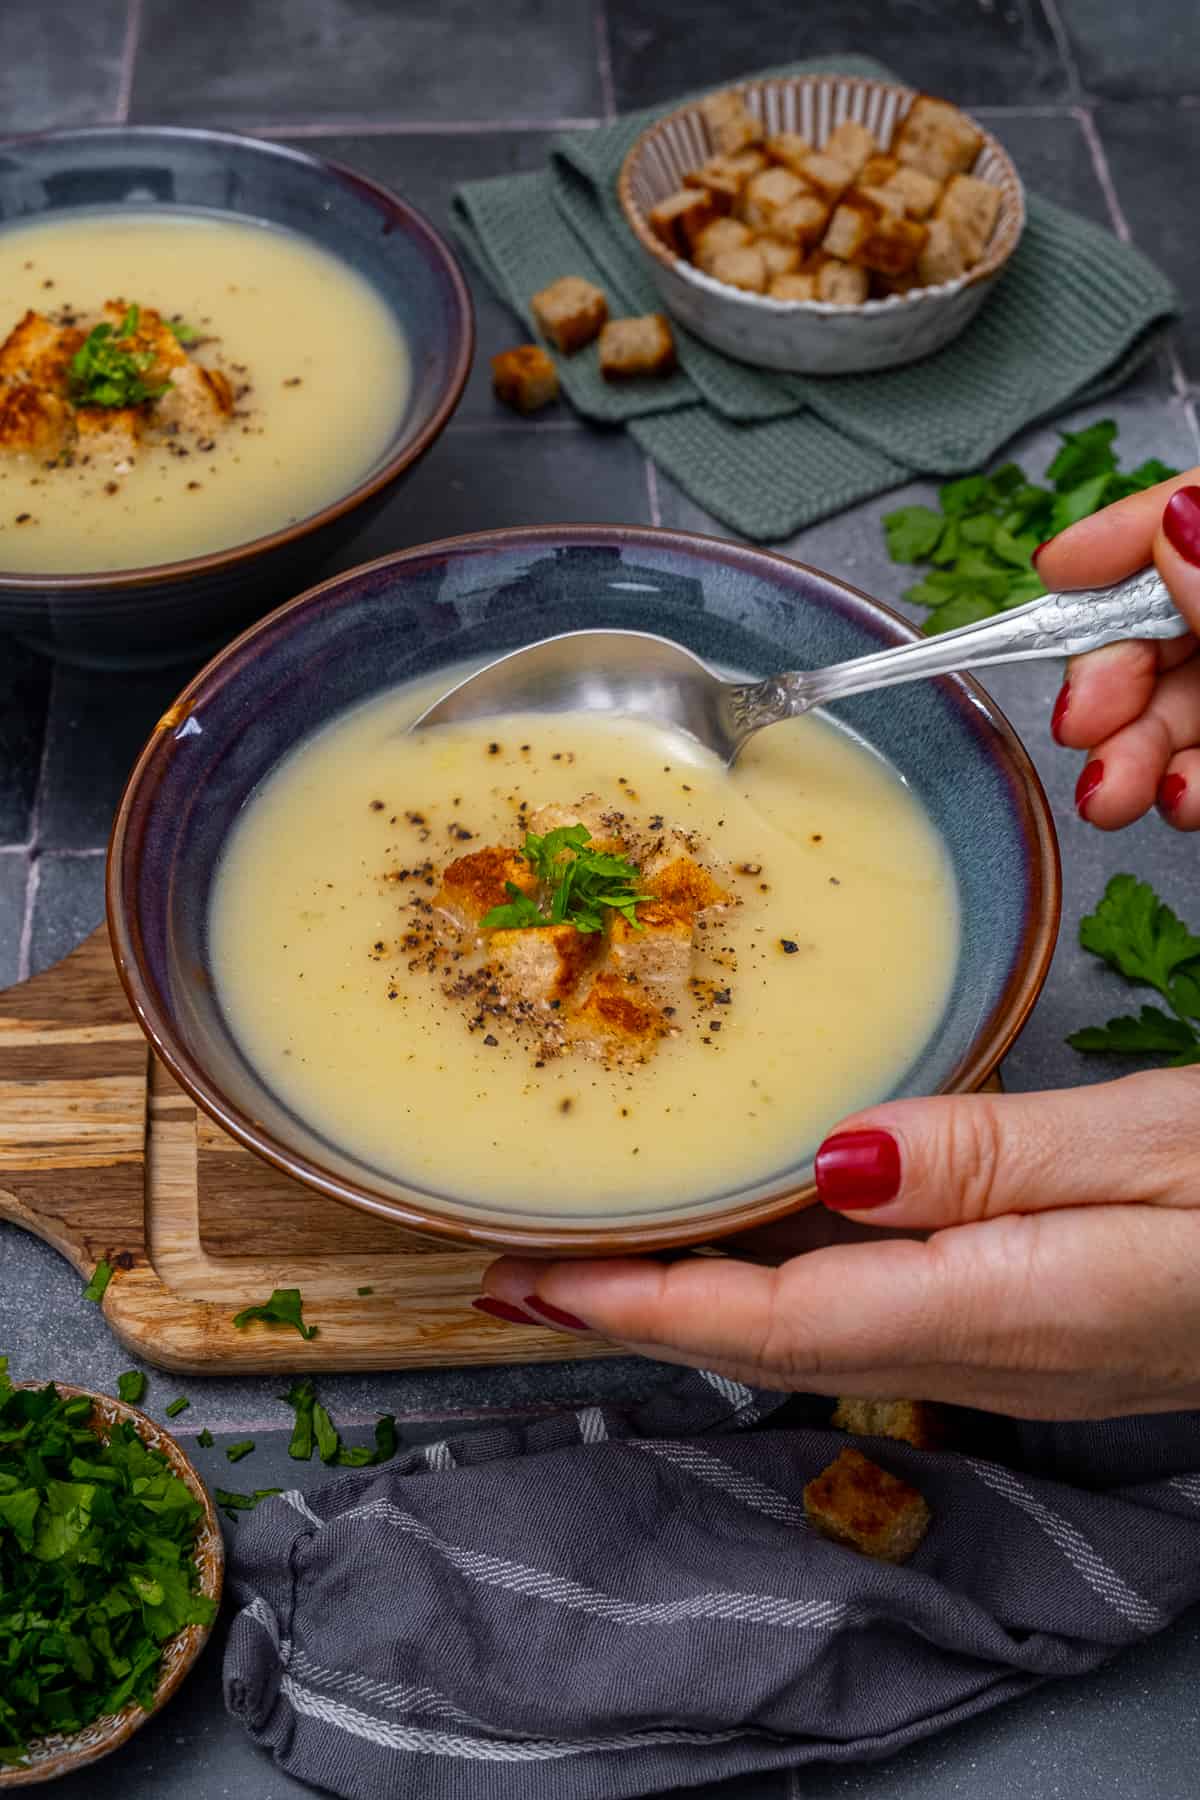 Hands holding a bowl of Jerusalem artichoke soup and placing a spoon inside it.